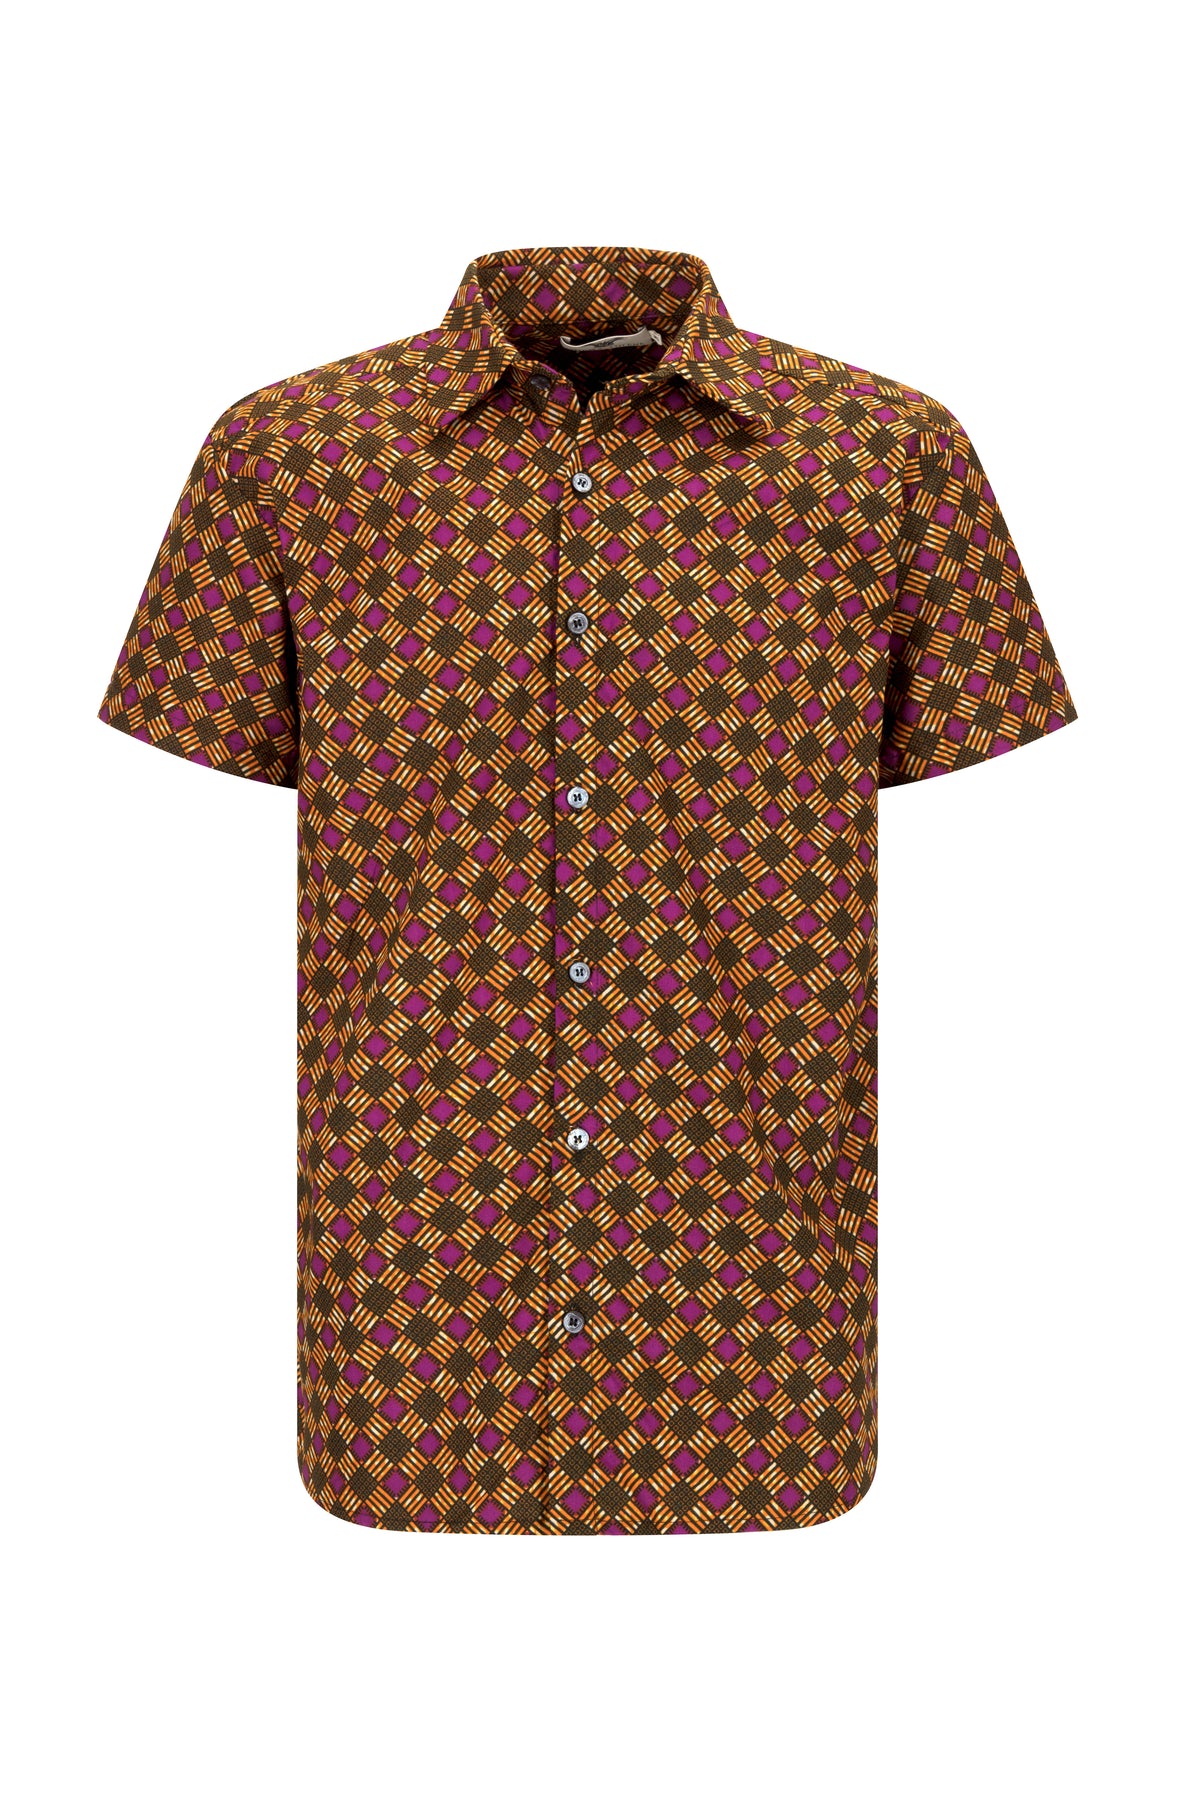 Sustainable Men's shirts African print 